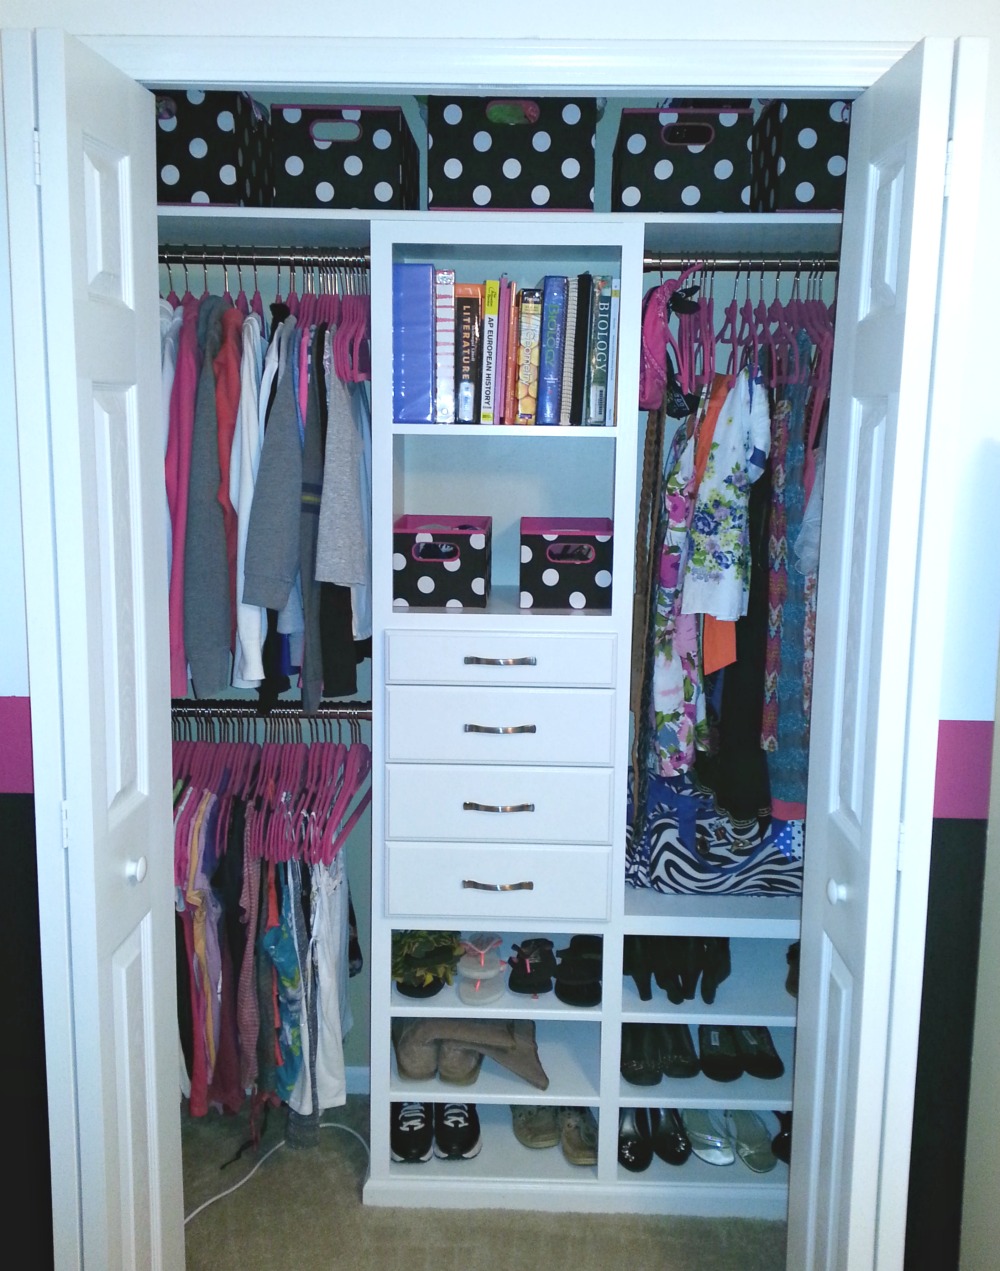 Pink hangers are in this small closet.